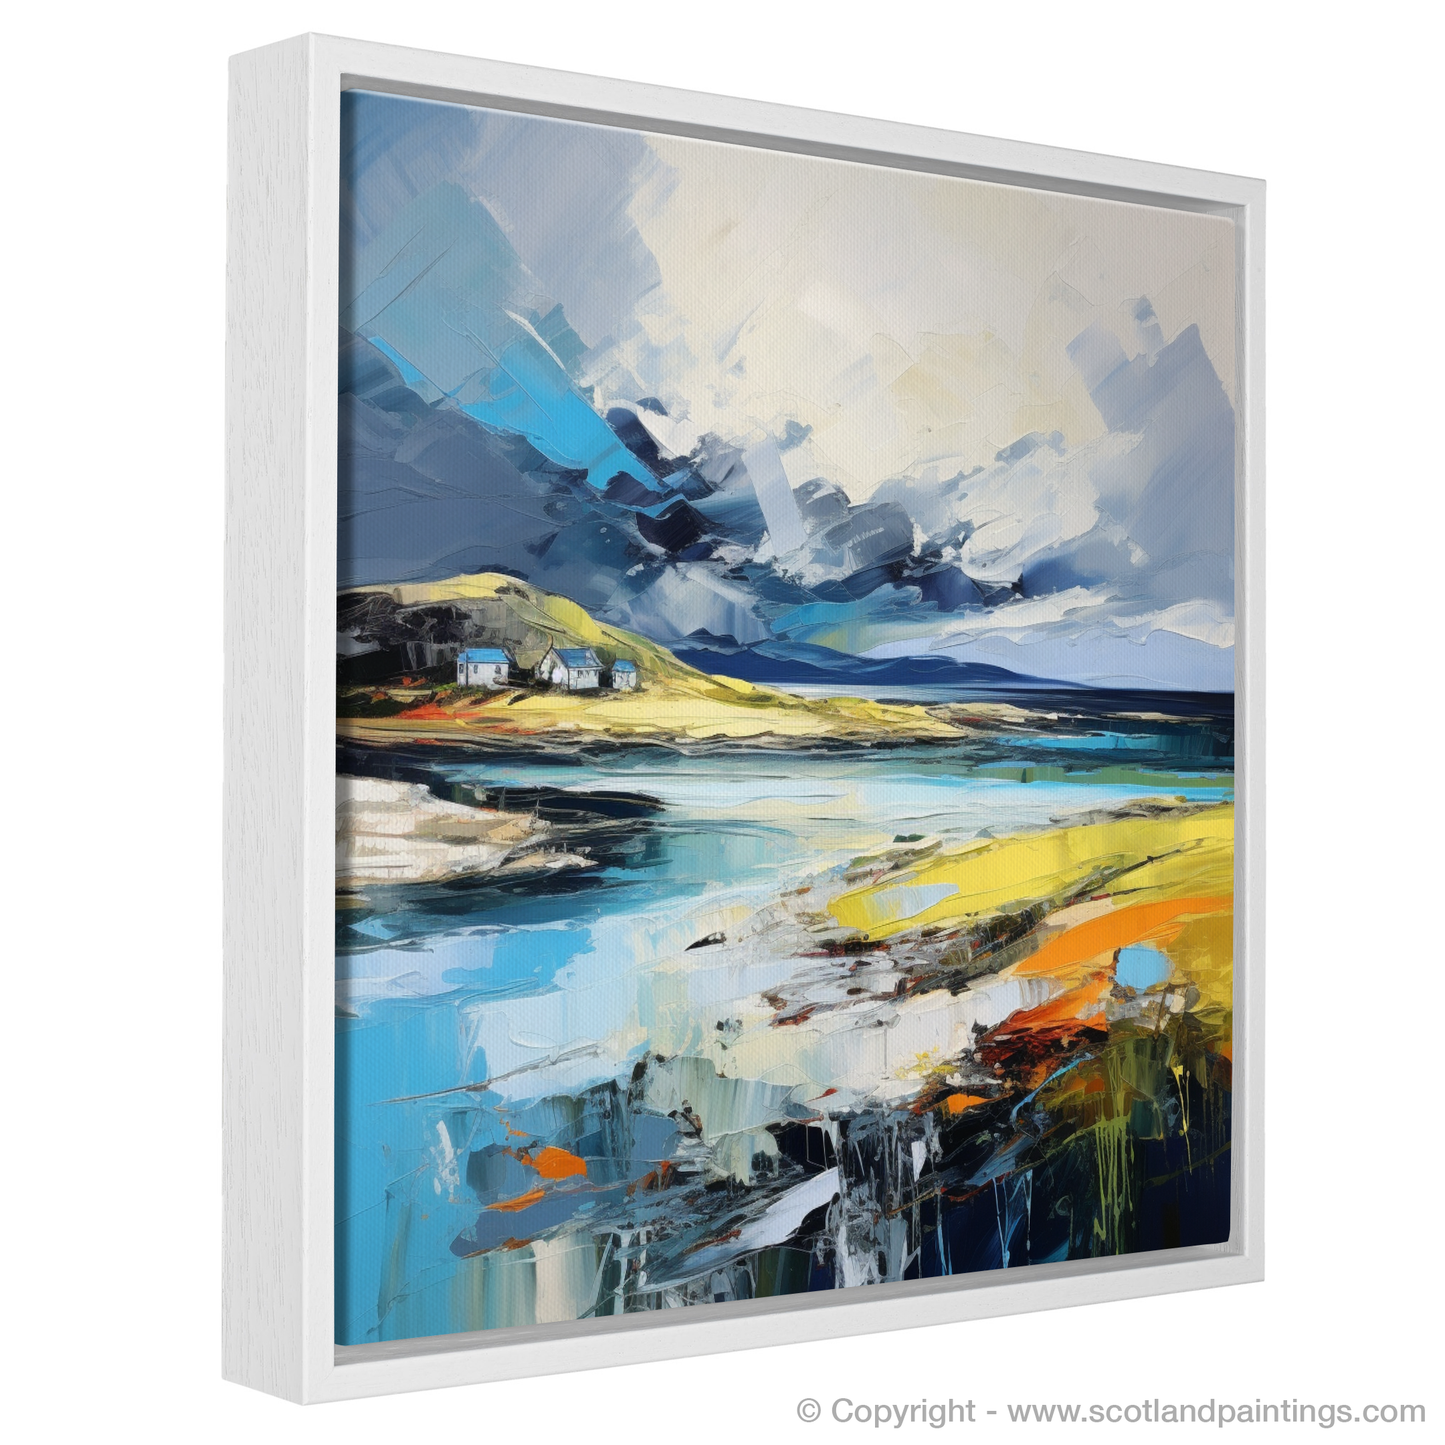 Painting and Art Print of Achmelvich Bay with a stormy sky entitled "Storm's Embrace over Achmelvich Bay".